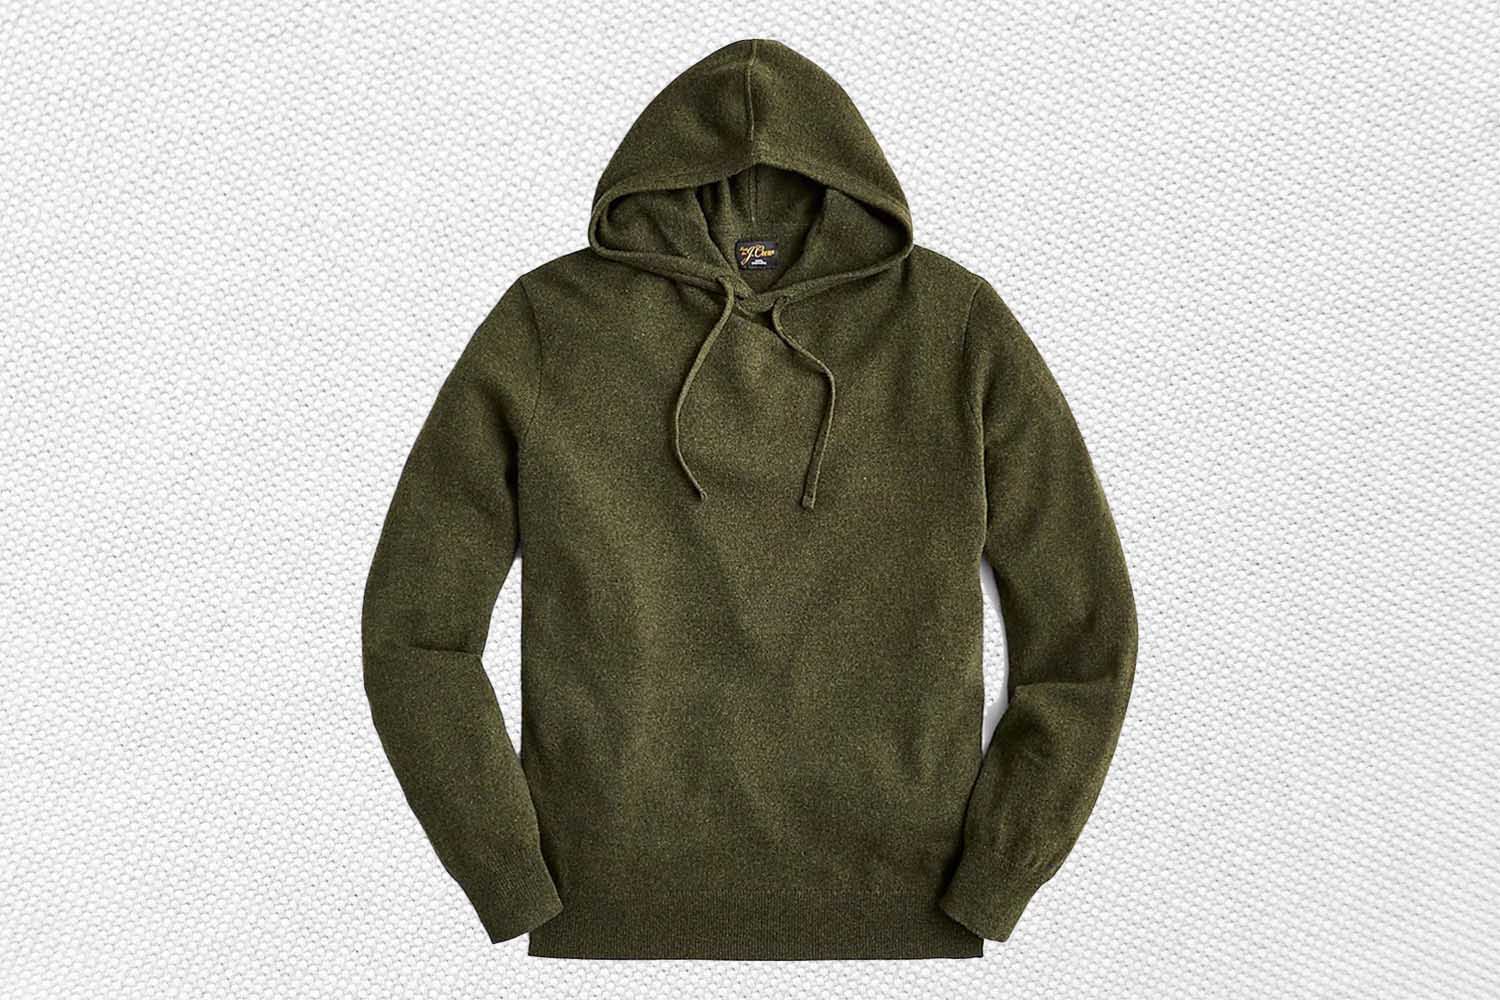 a green cashmere hoodie from J.Crew on a textured white background